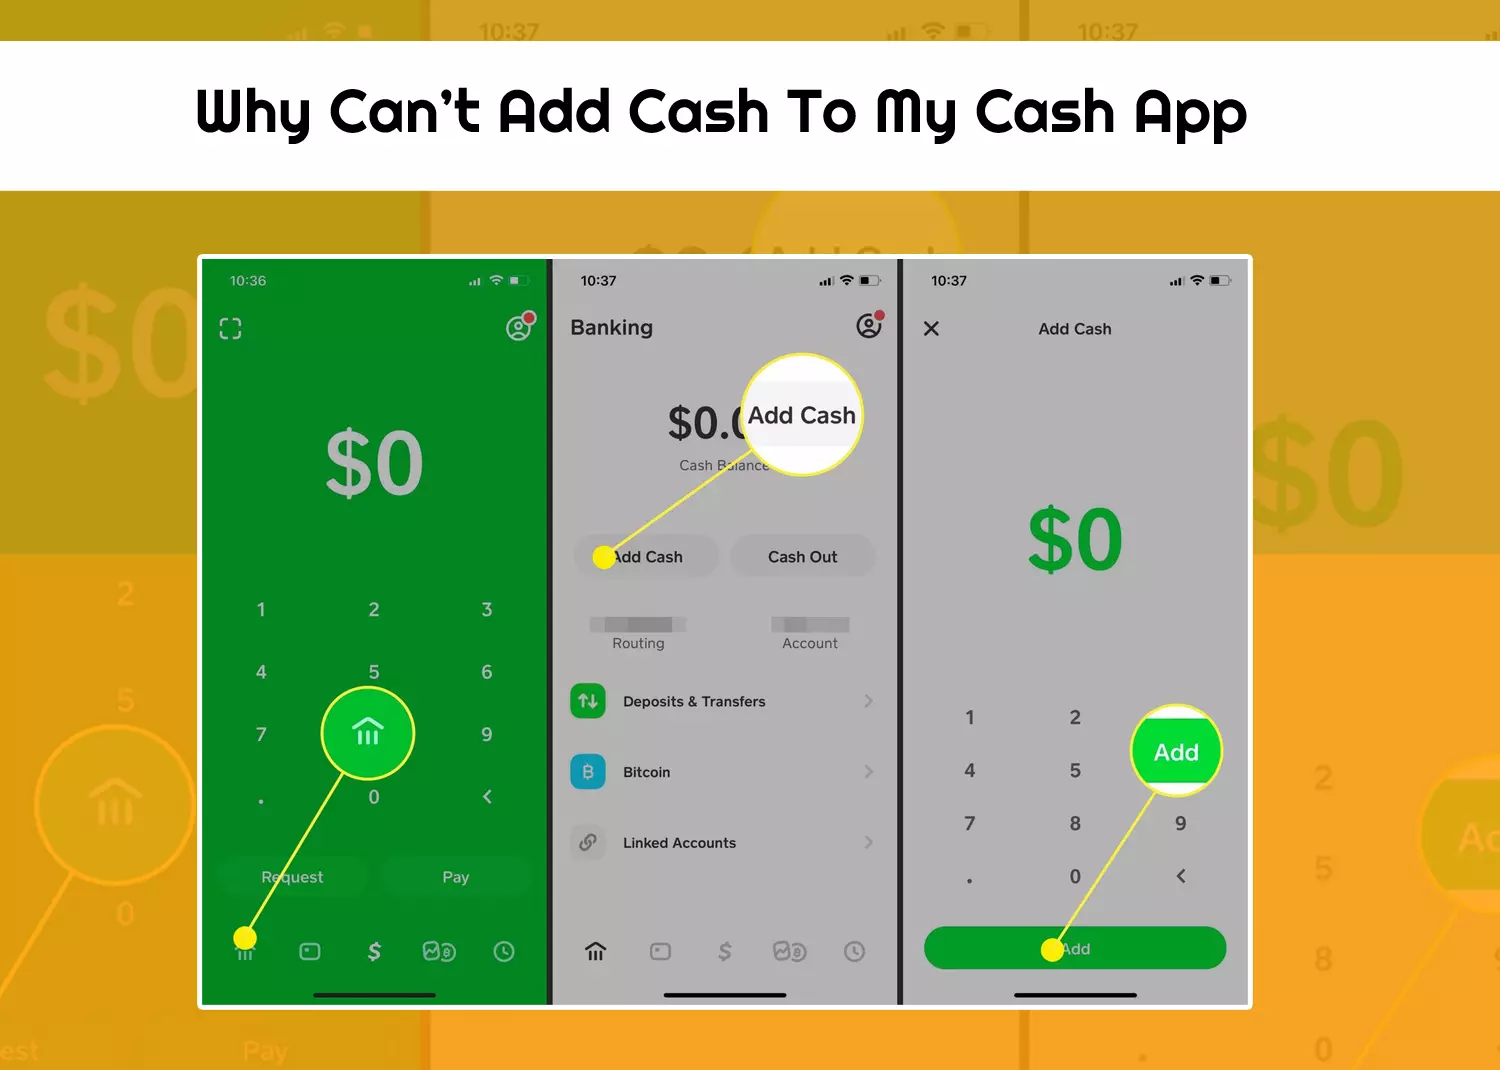 Why Can't Add Cash To My Cash App?